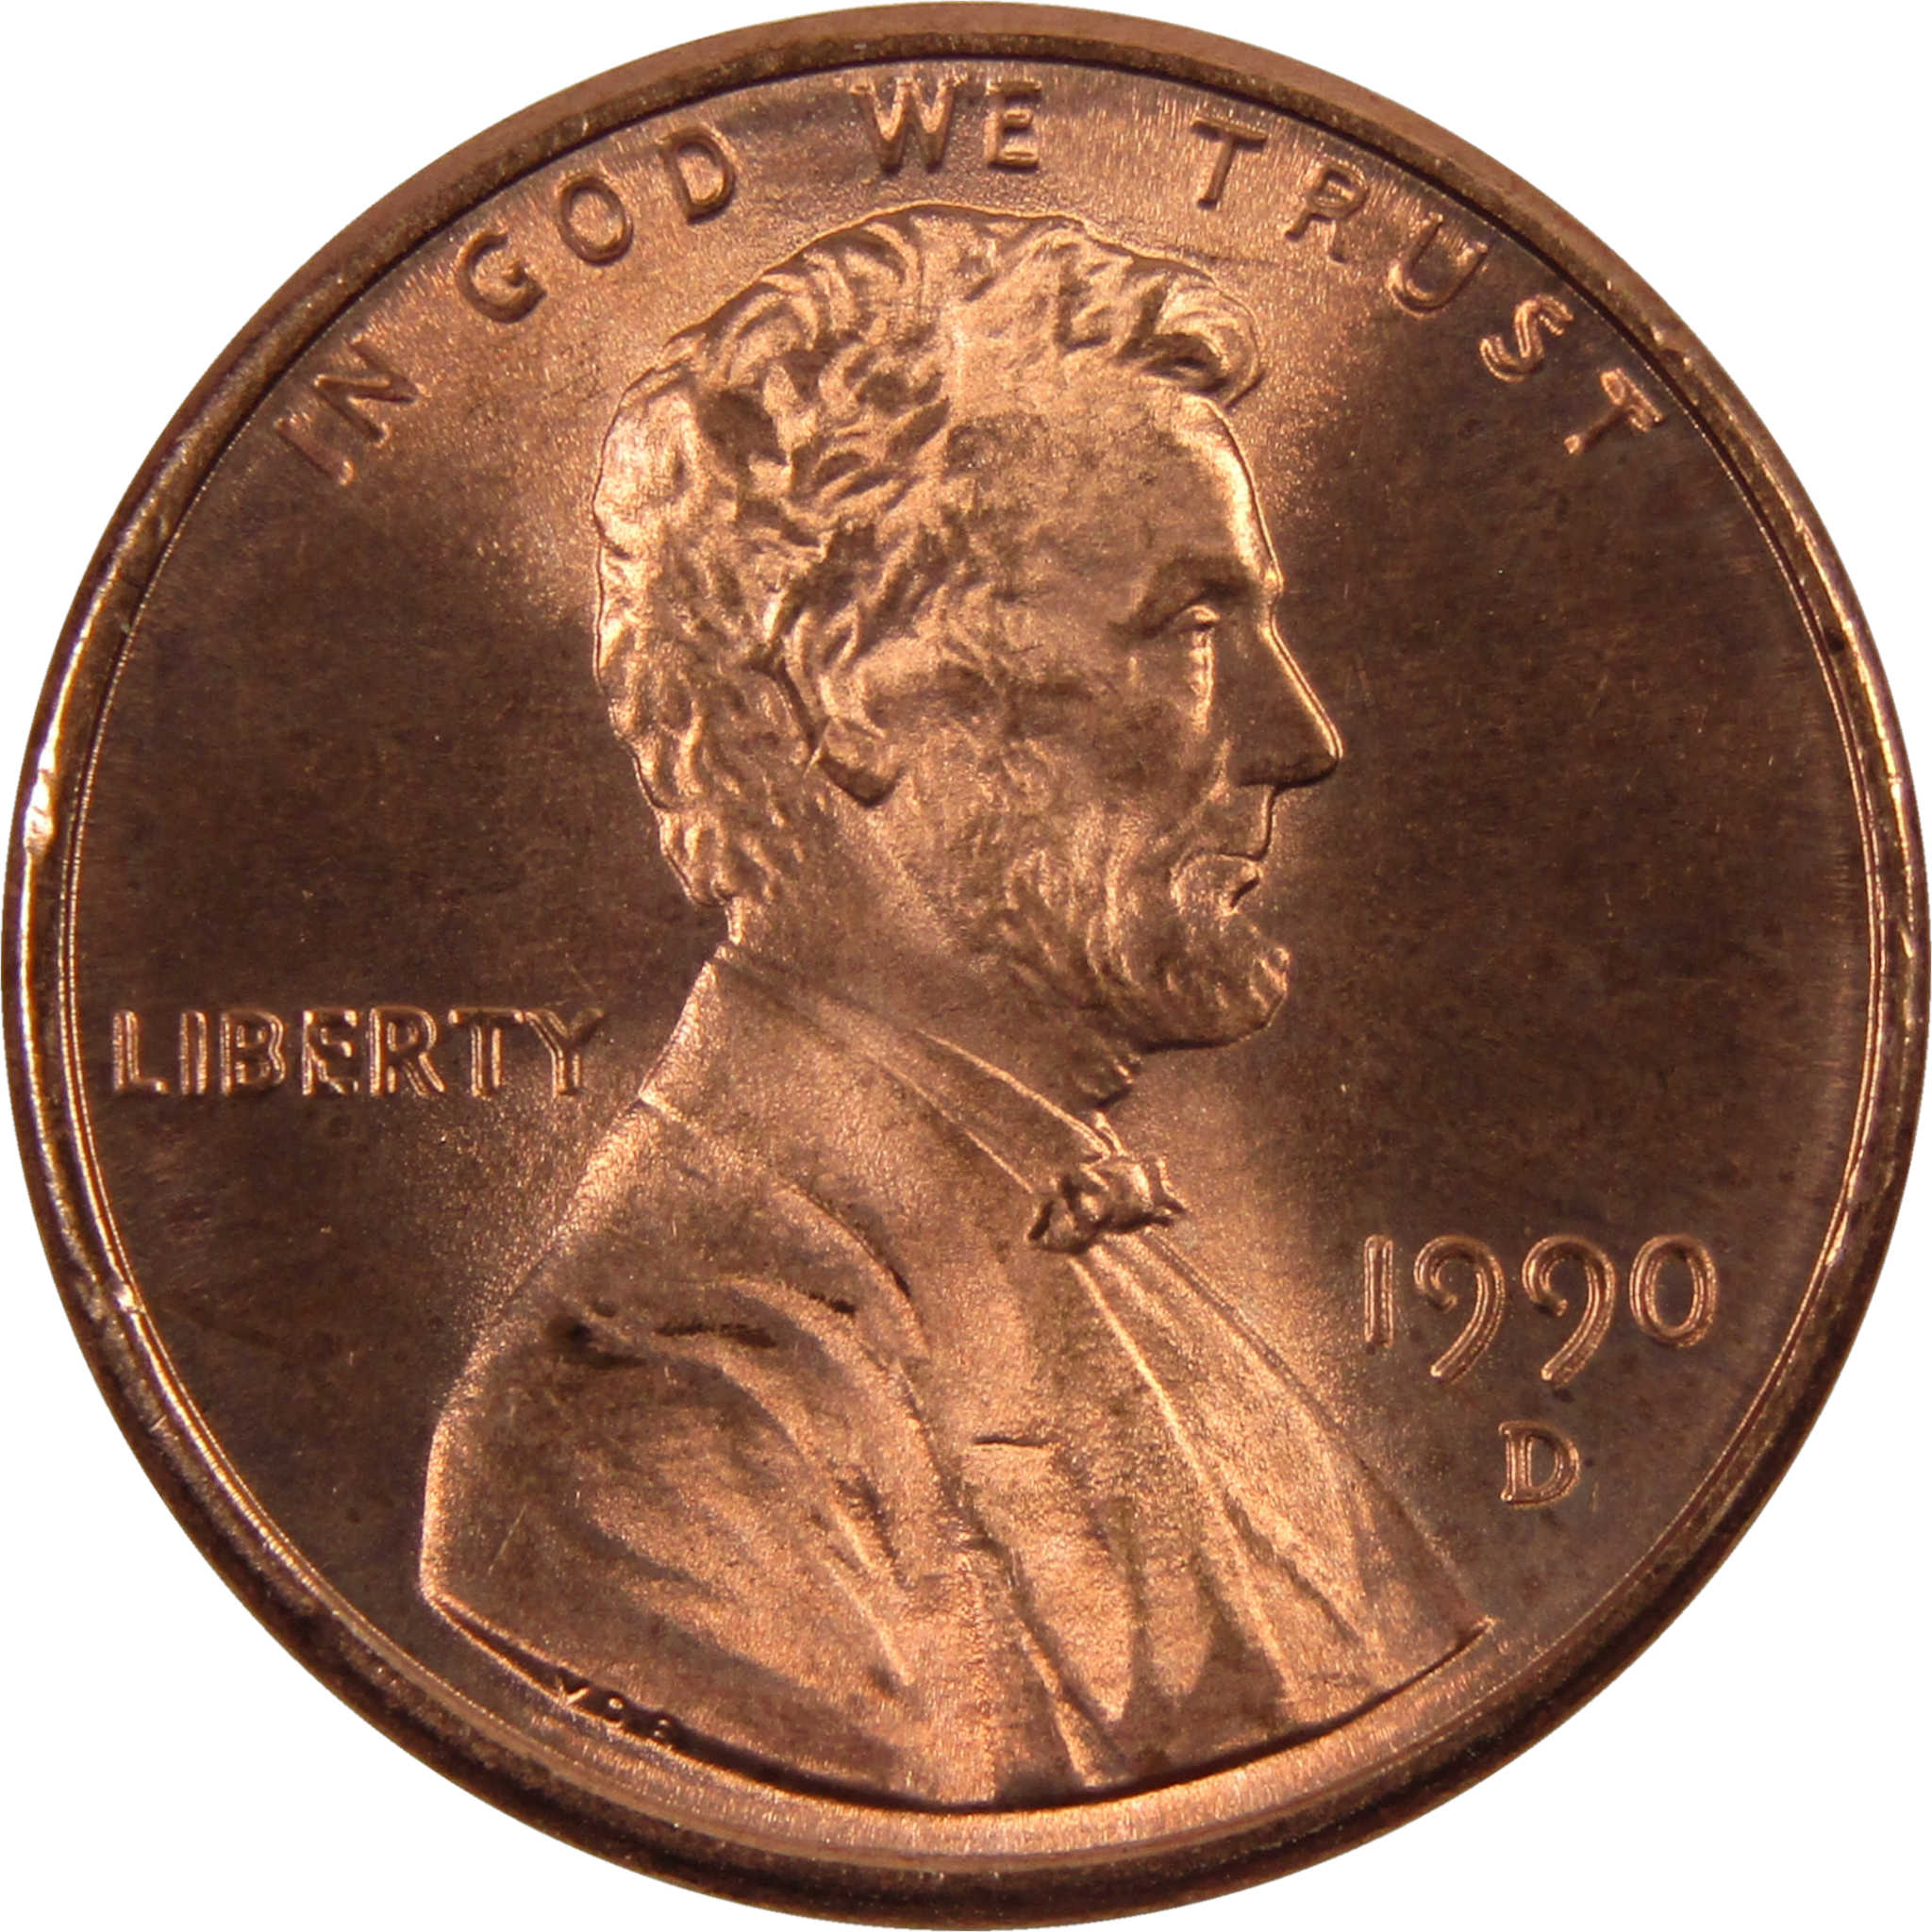 1990 D Lincoln Memorial Cent BU Uncirculated Penny 1c Coin